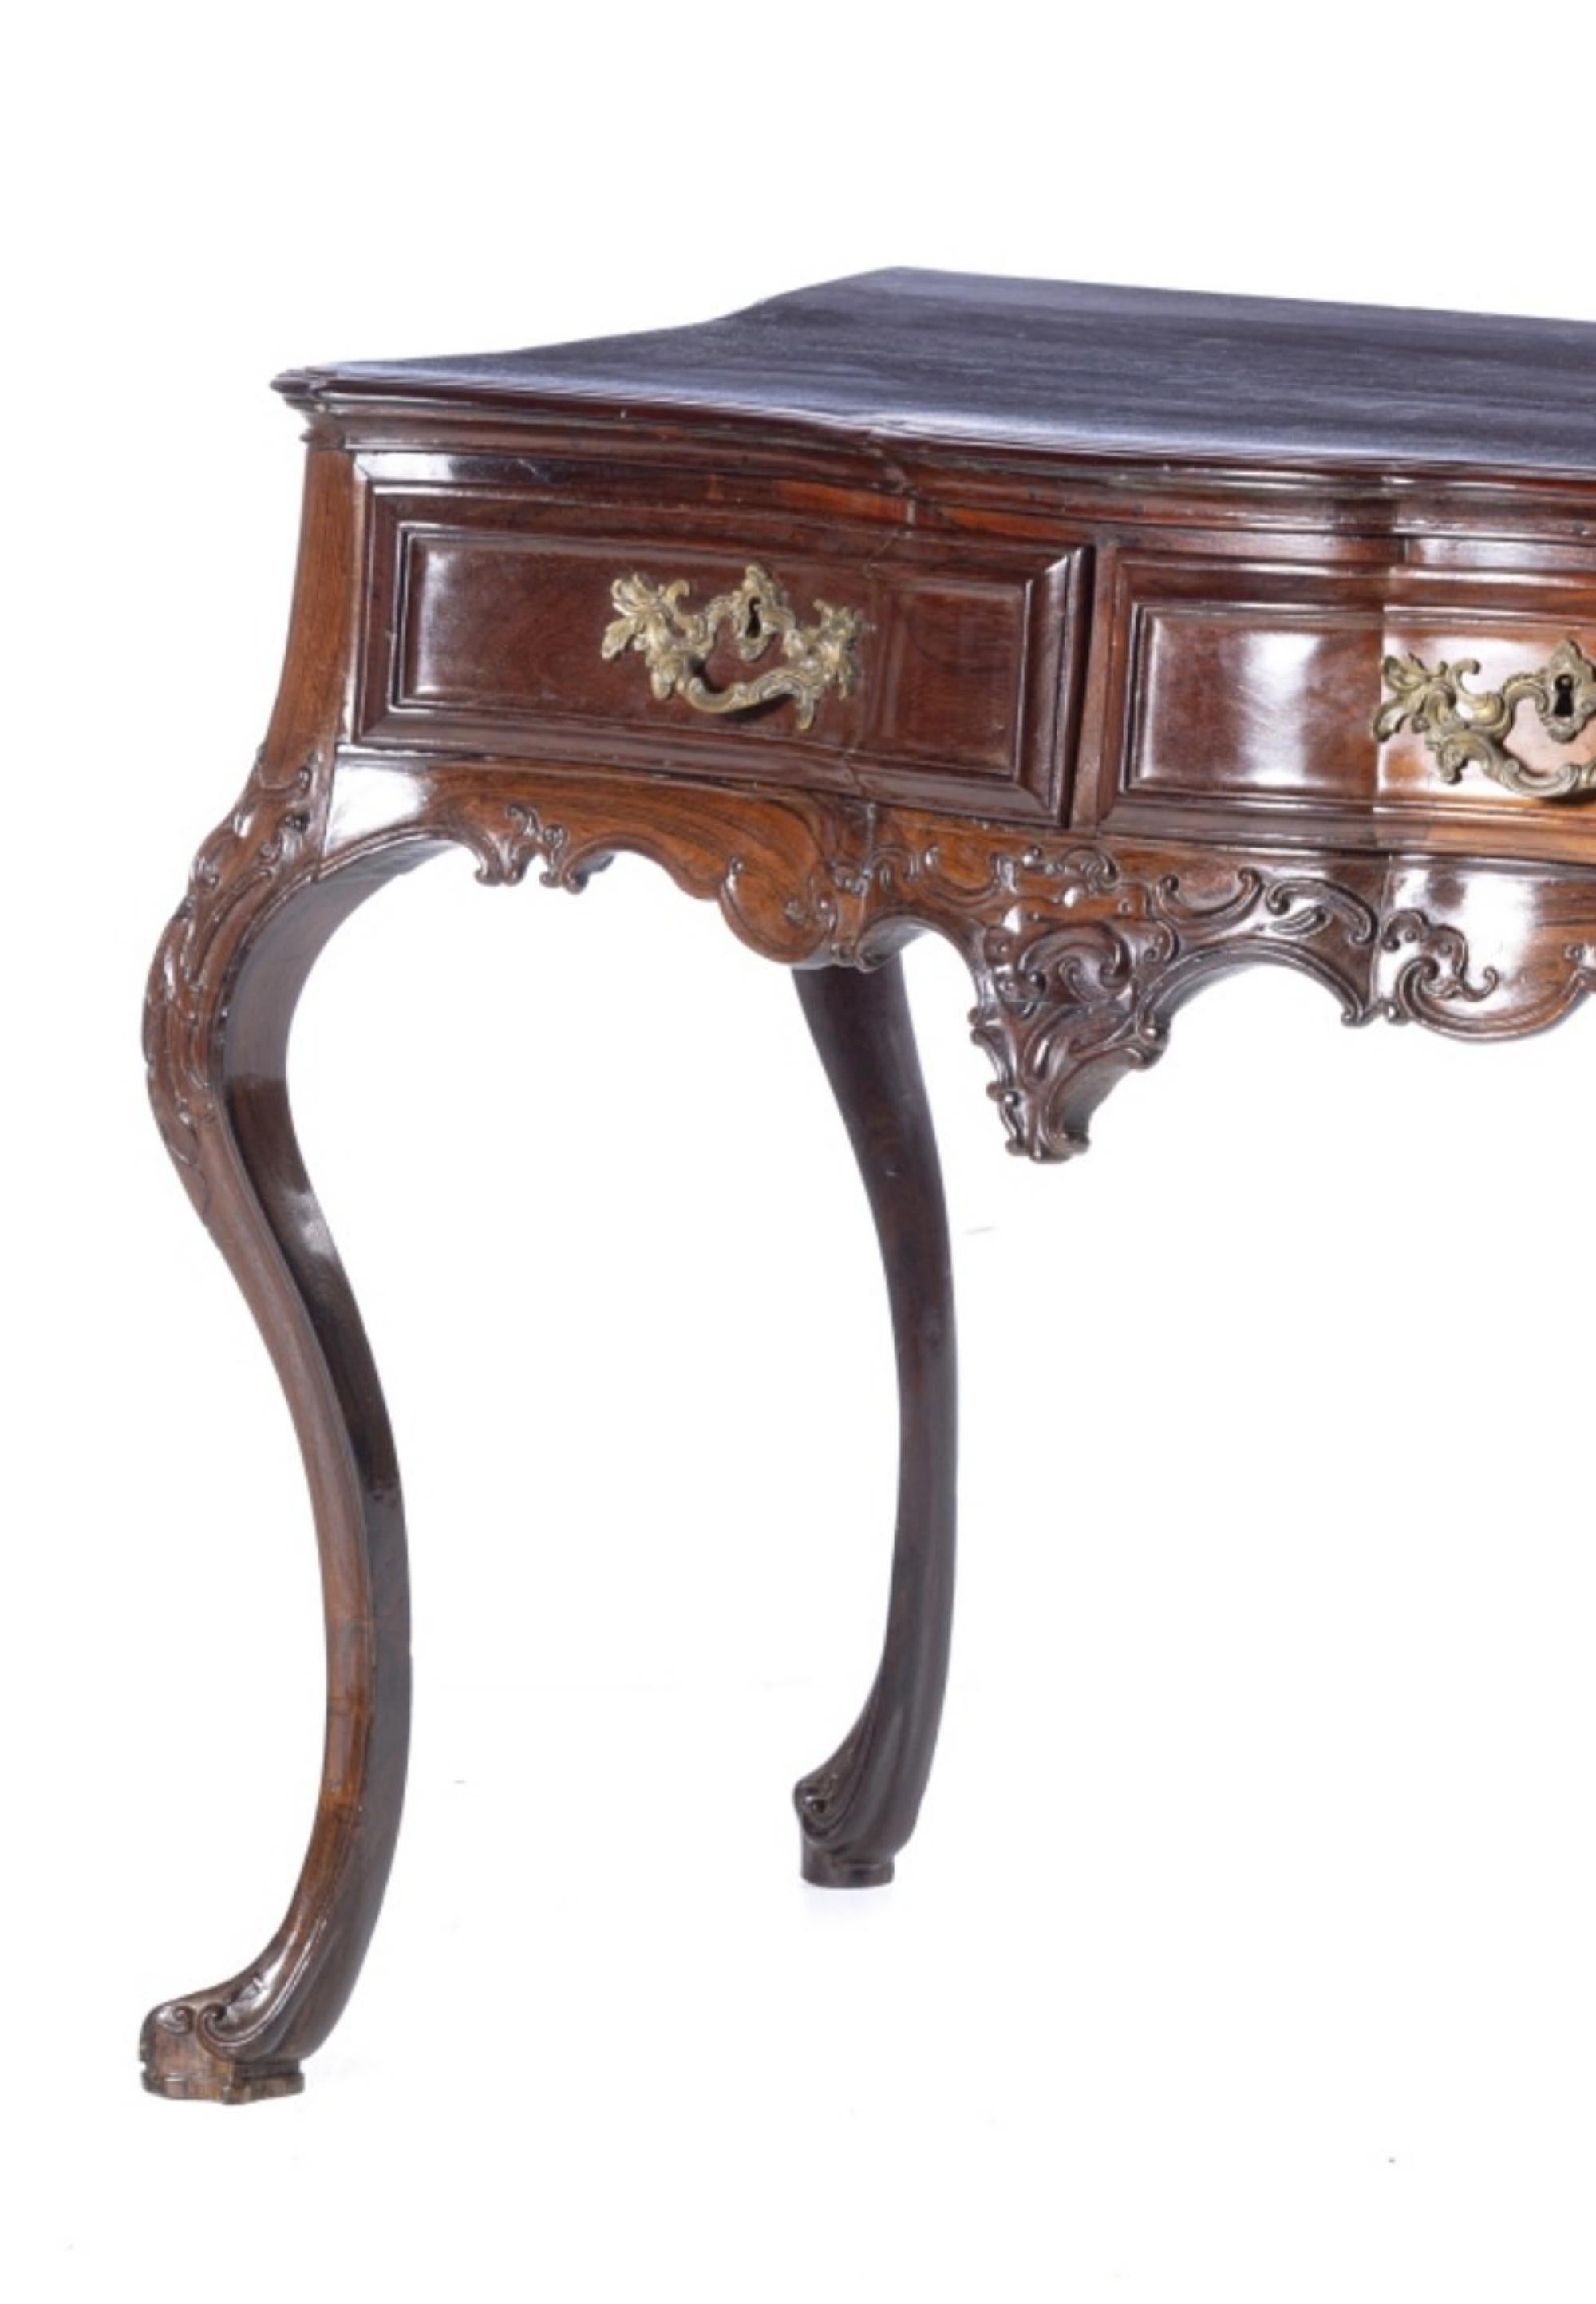 IMPORTANT PORTUGUESE BACKING TABLE D. JOSÉ 18th century

in rosewood wood with two drawers. Cut skirts decorated with carved elements, finished in curved feet. Metal hardware.
DIM.: 79 x 104 x 55 cm.
good condition for the age.